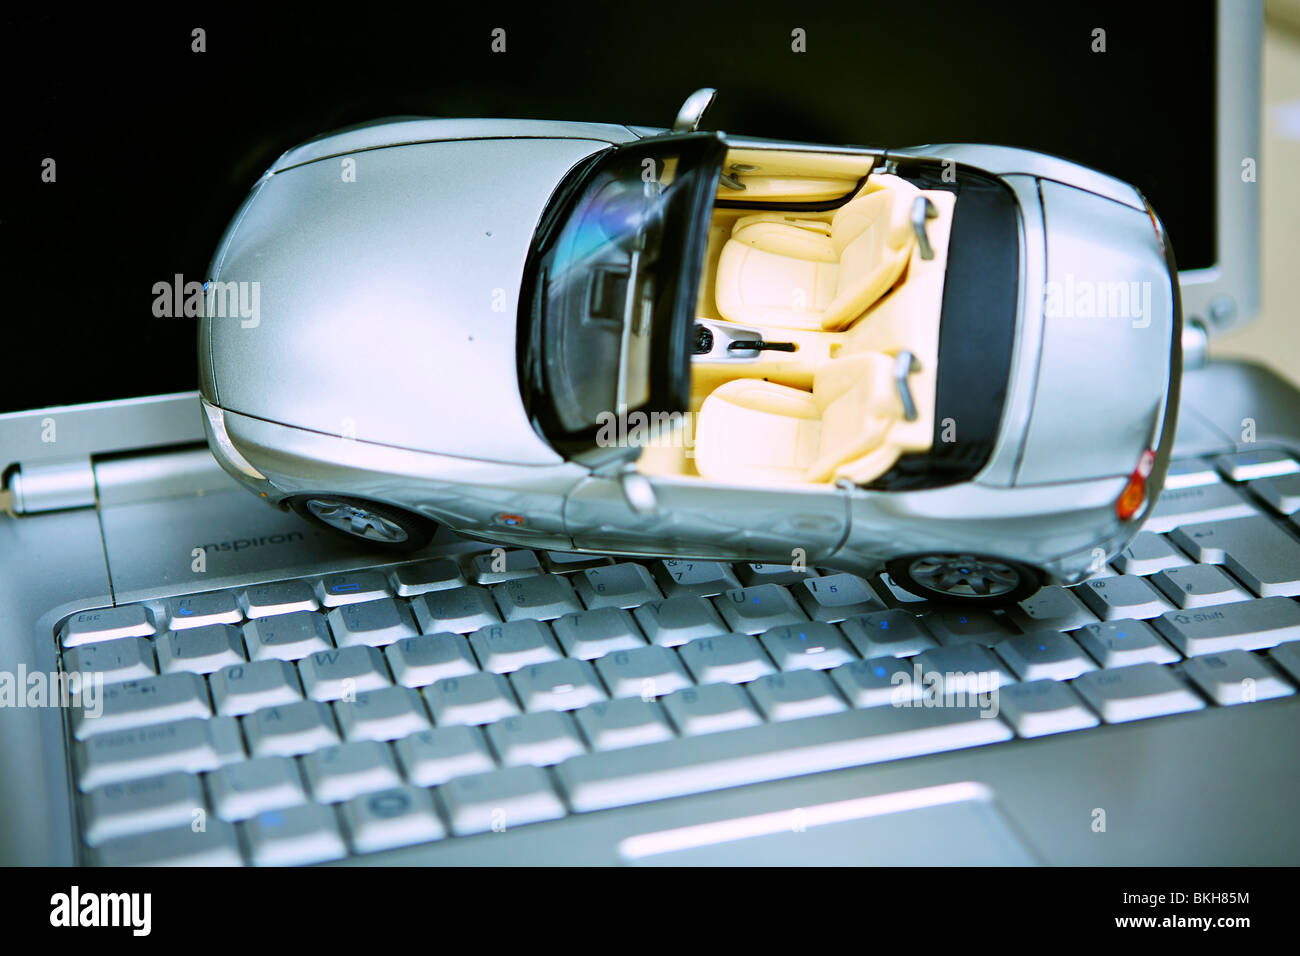 A toy BMW Z3 car on a laptop computer keyboard, representing booking a hire car online. Stock Photo